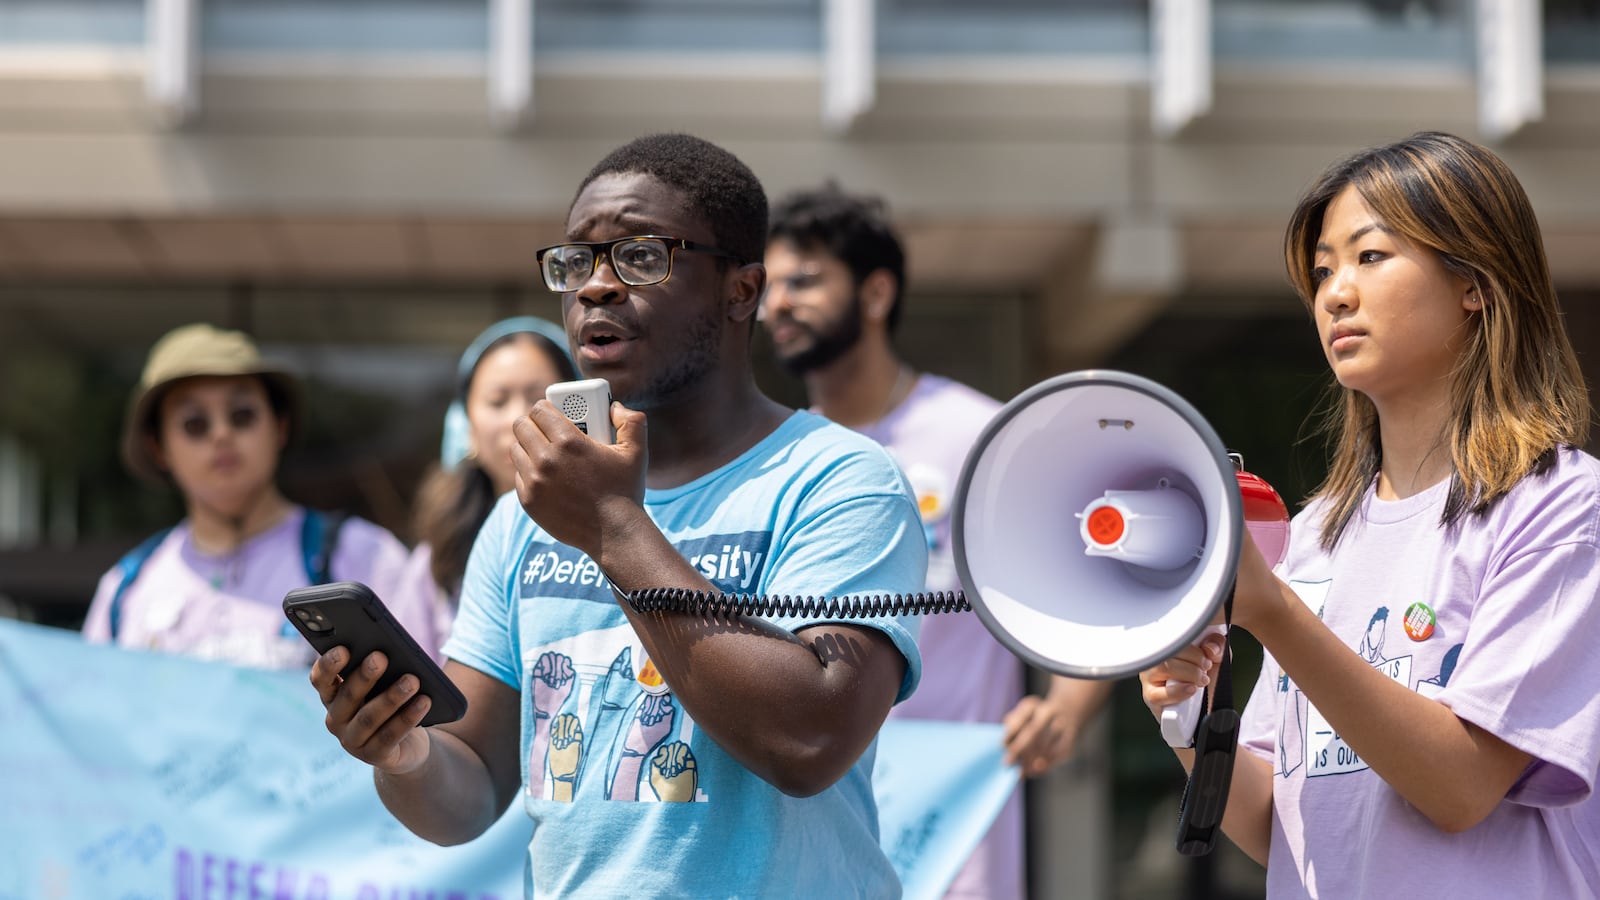 A person speaks into a megaphone at Harvard University’s Science Center Plaza during a rally.